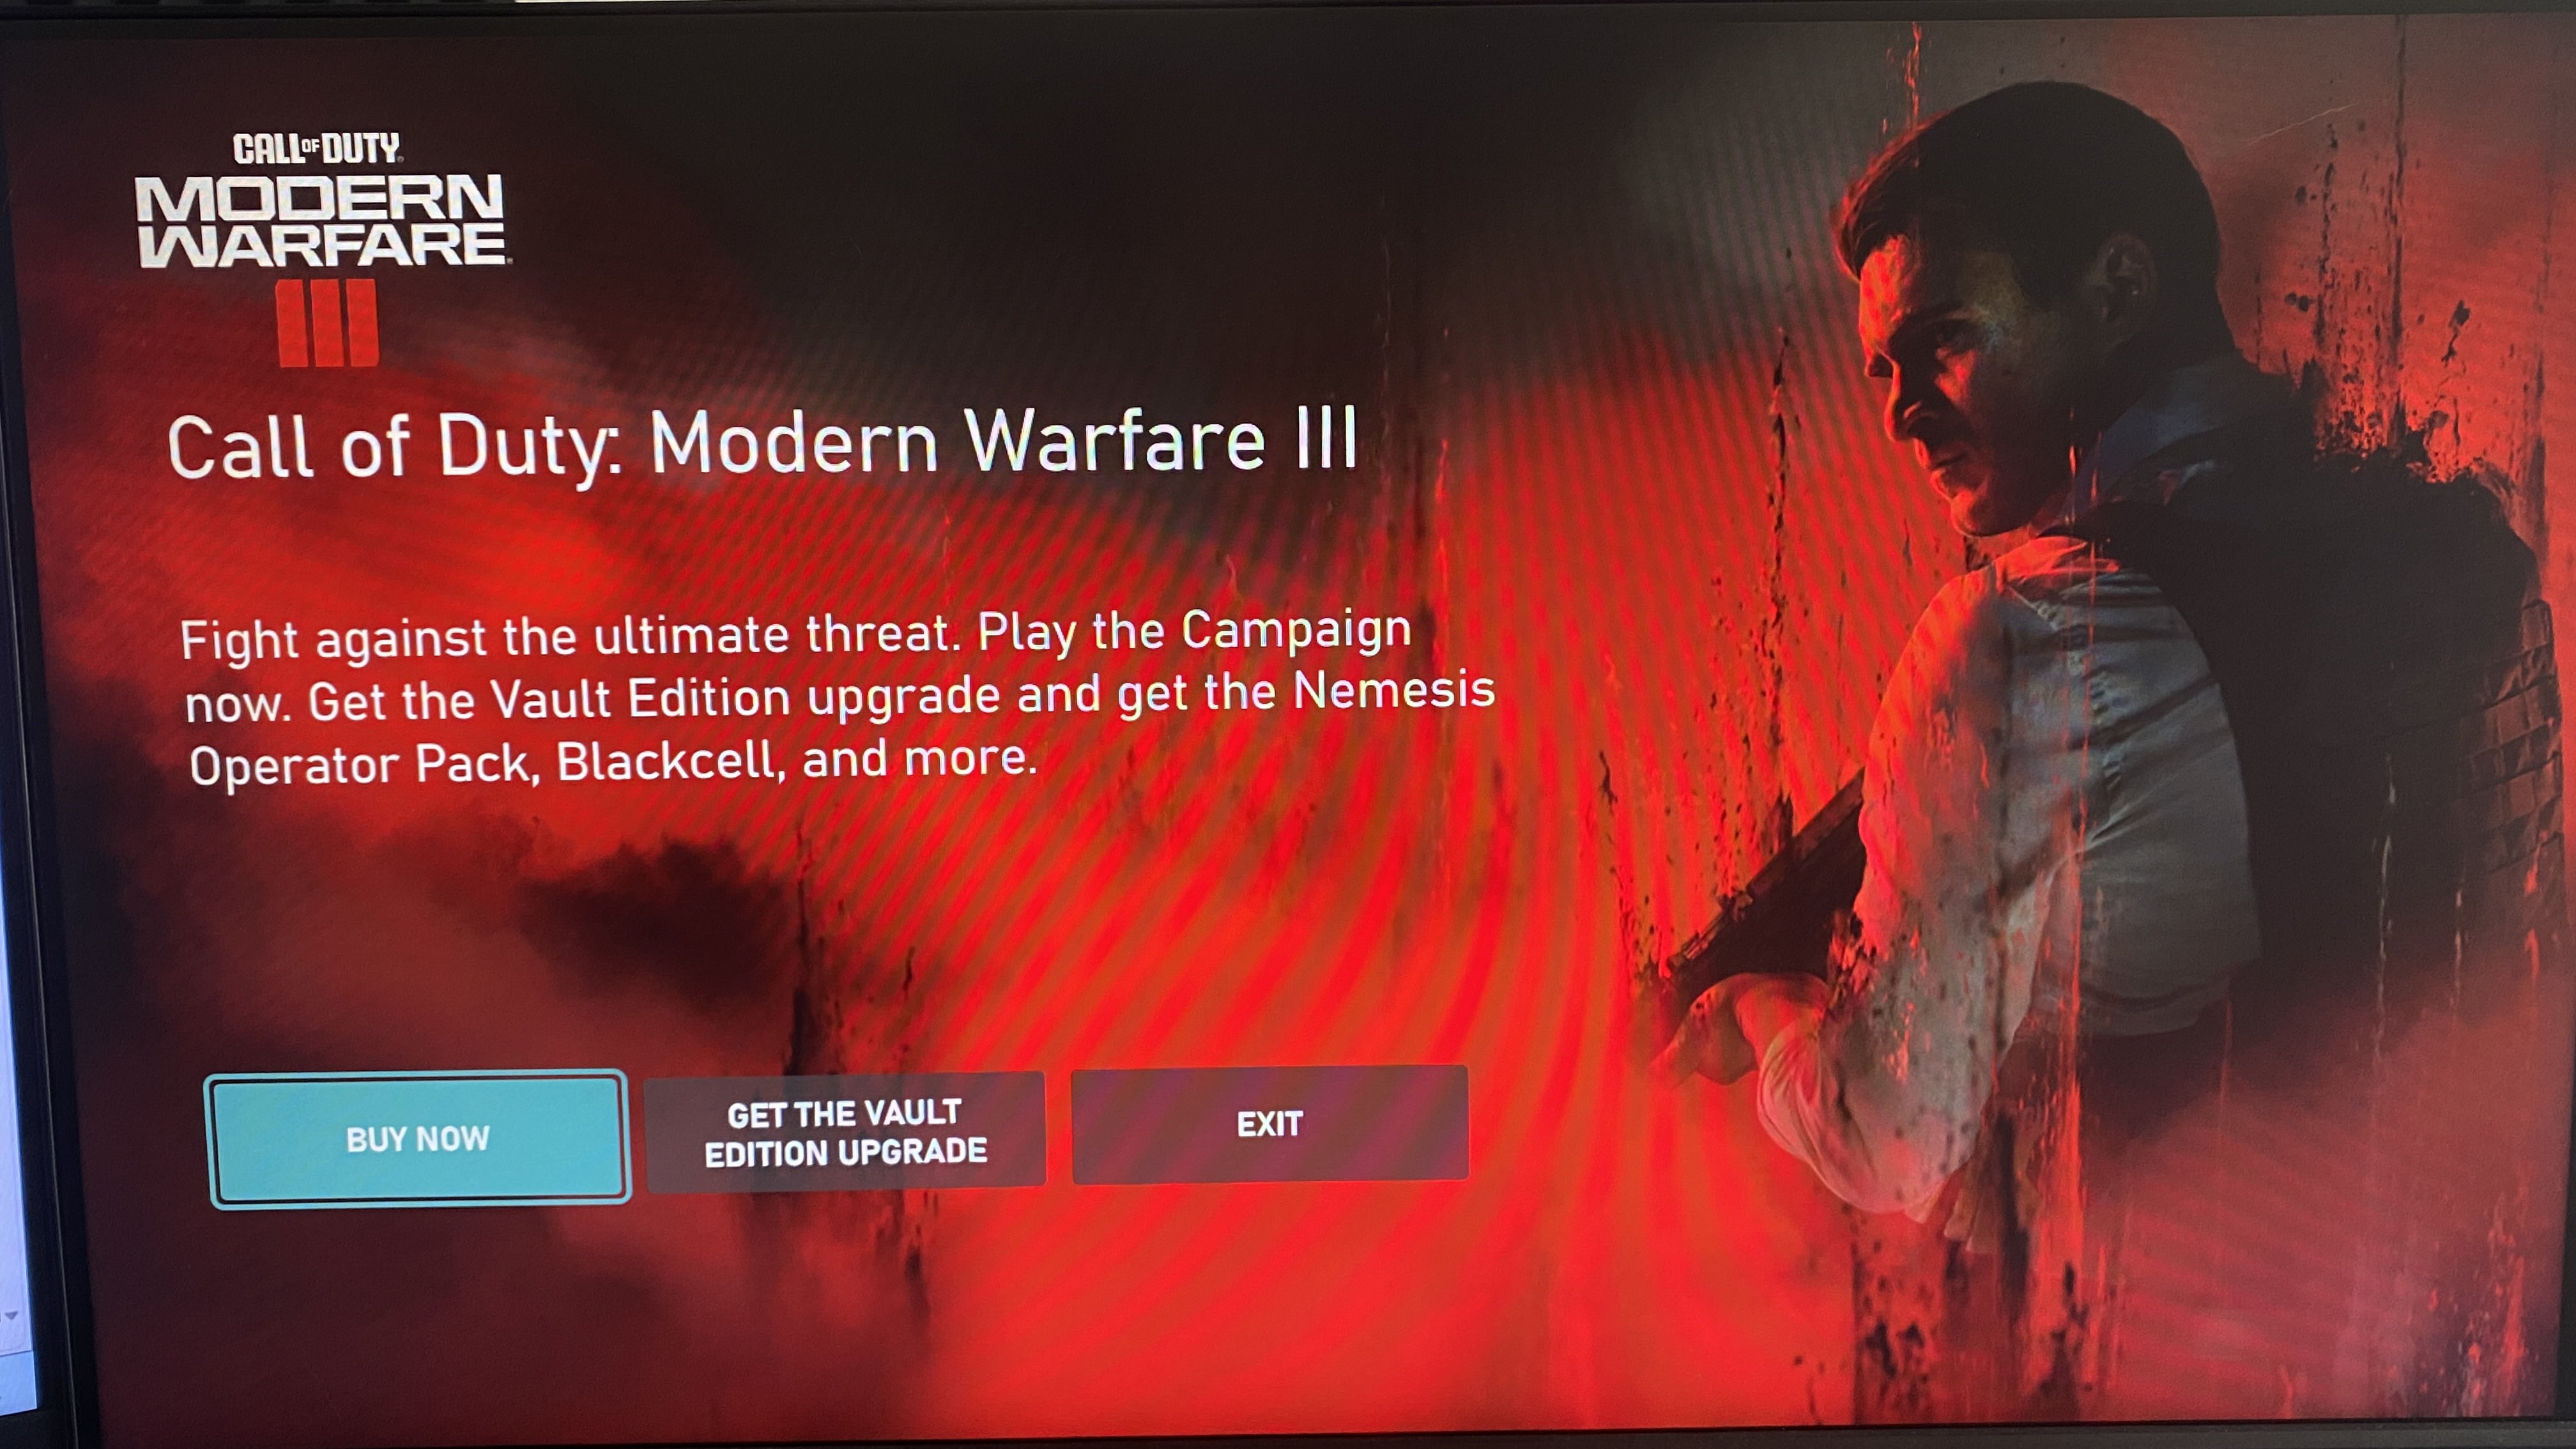 Xbox pushes full-screen pop up ads for Modern Warfare 3 | VGC